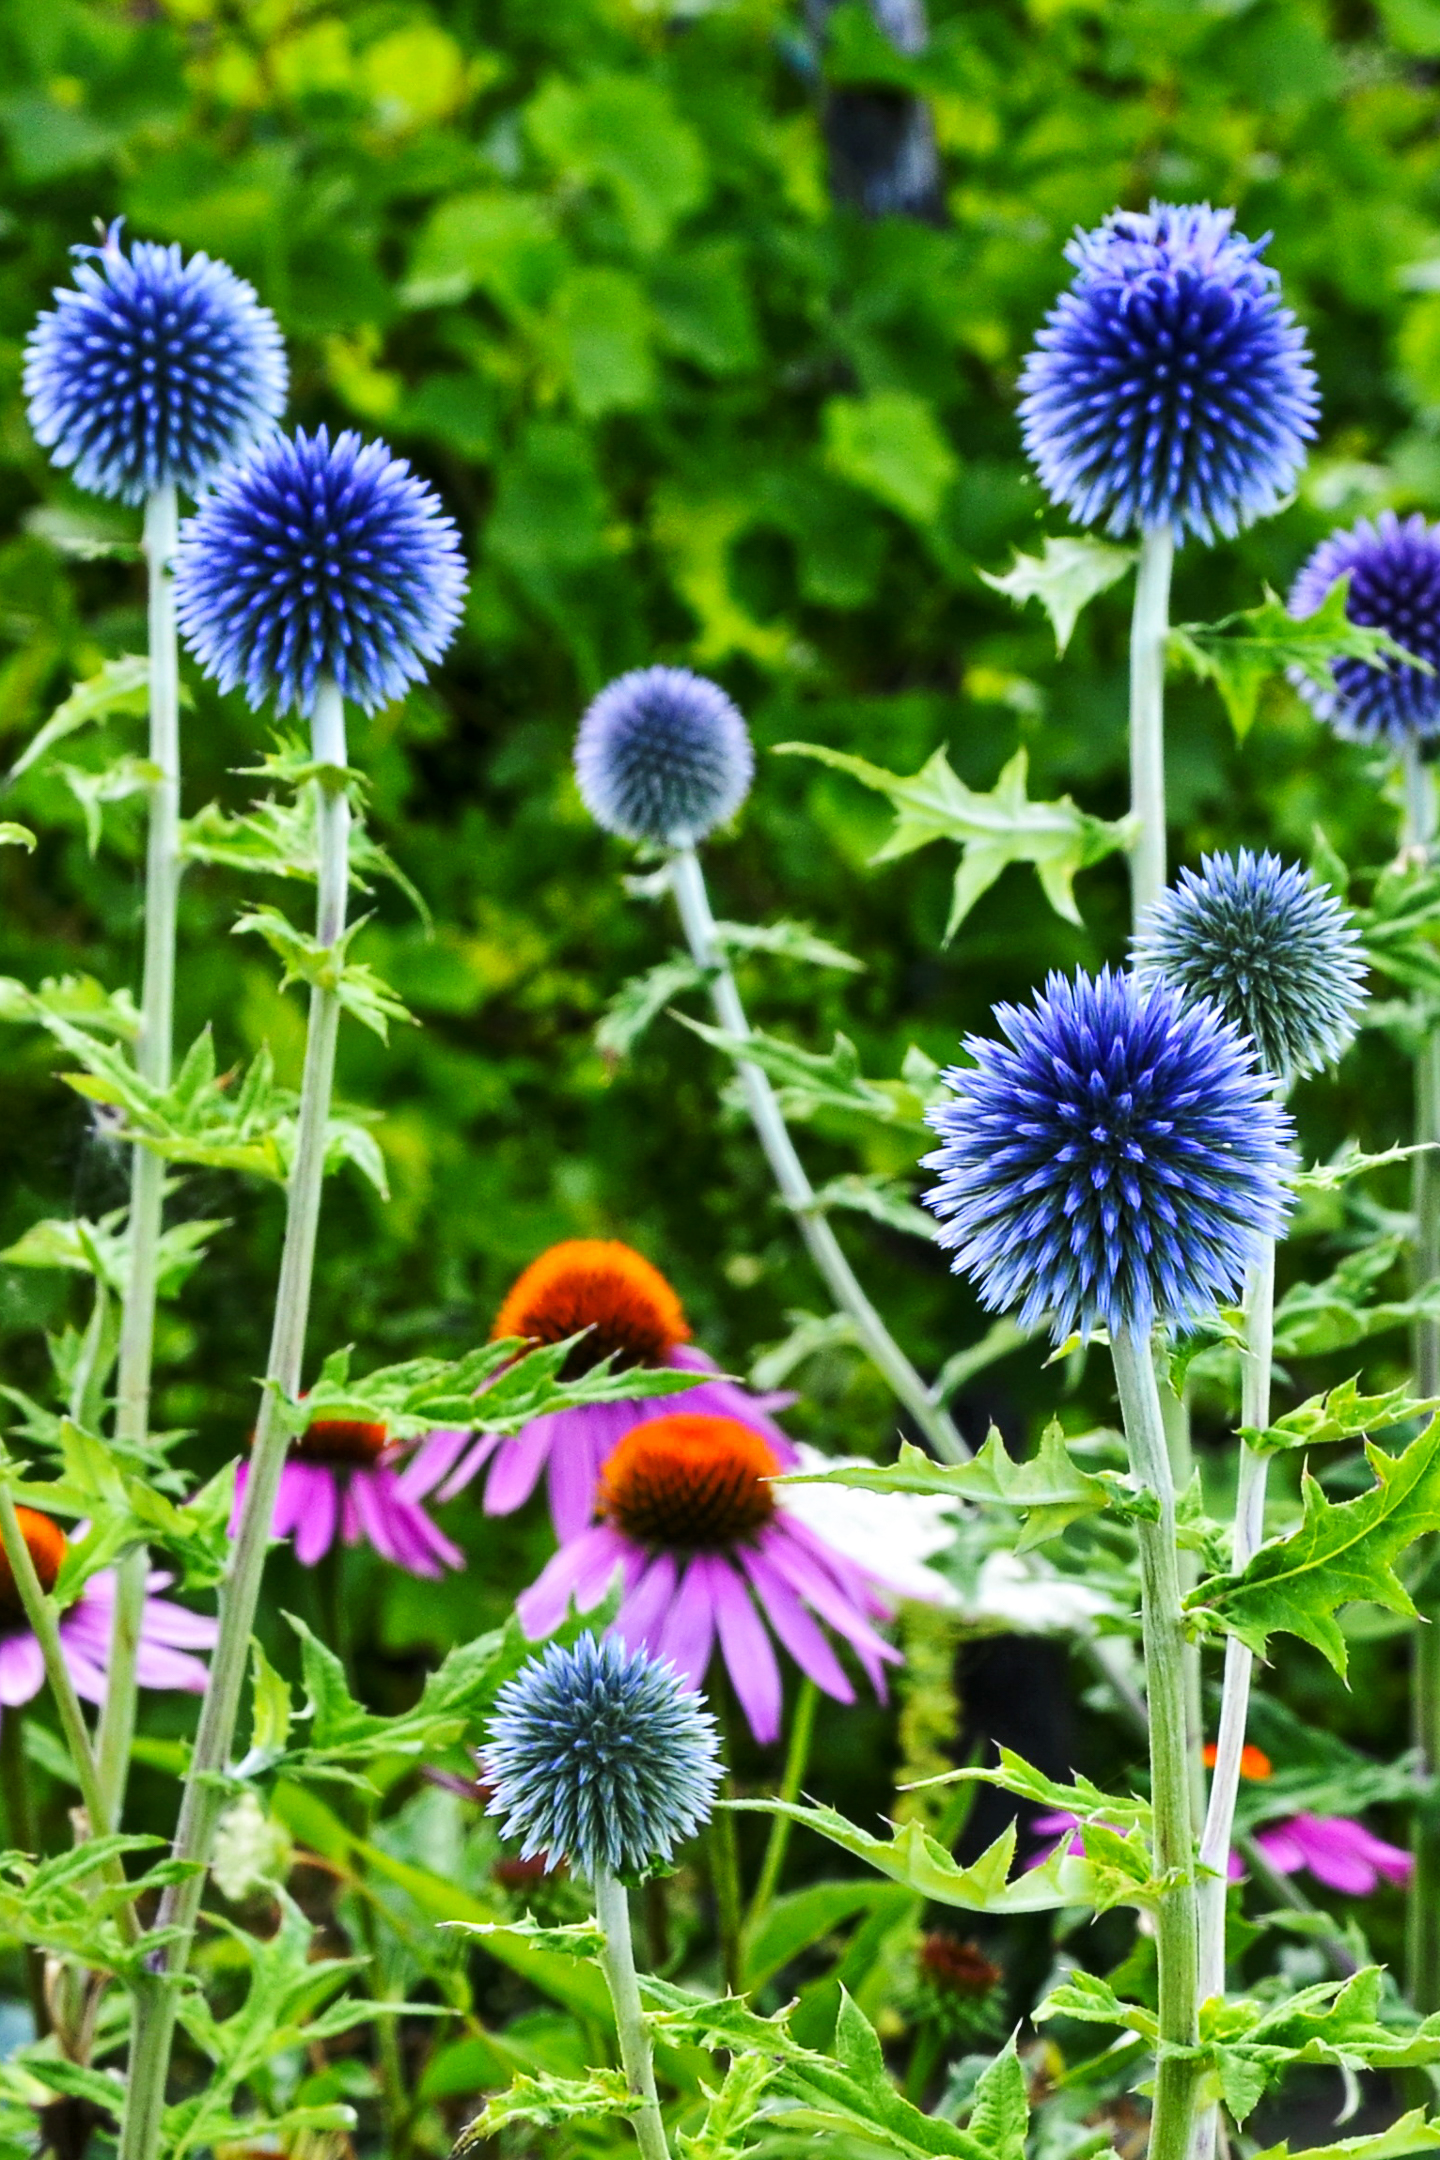 Blue globe thistle with pink coneflowers in the background